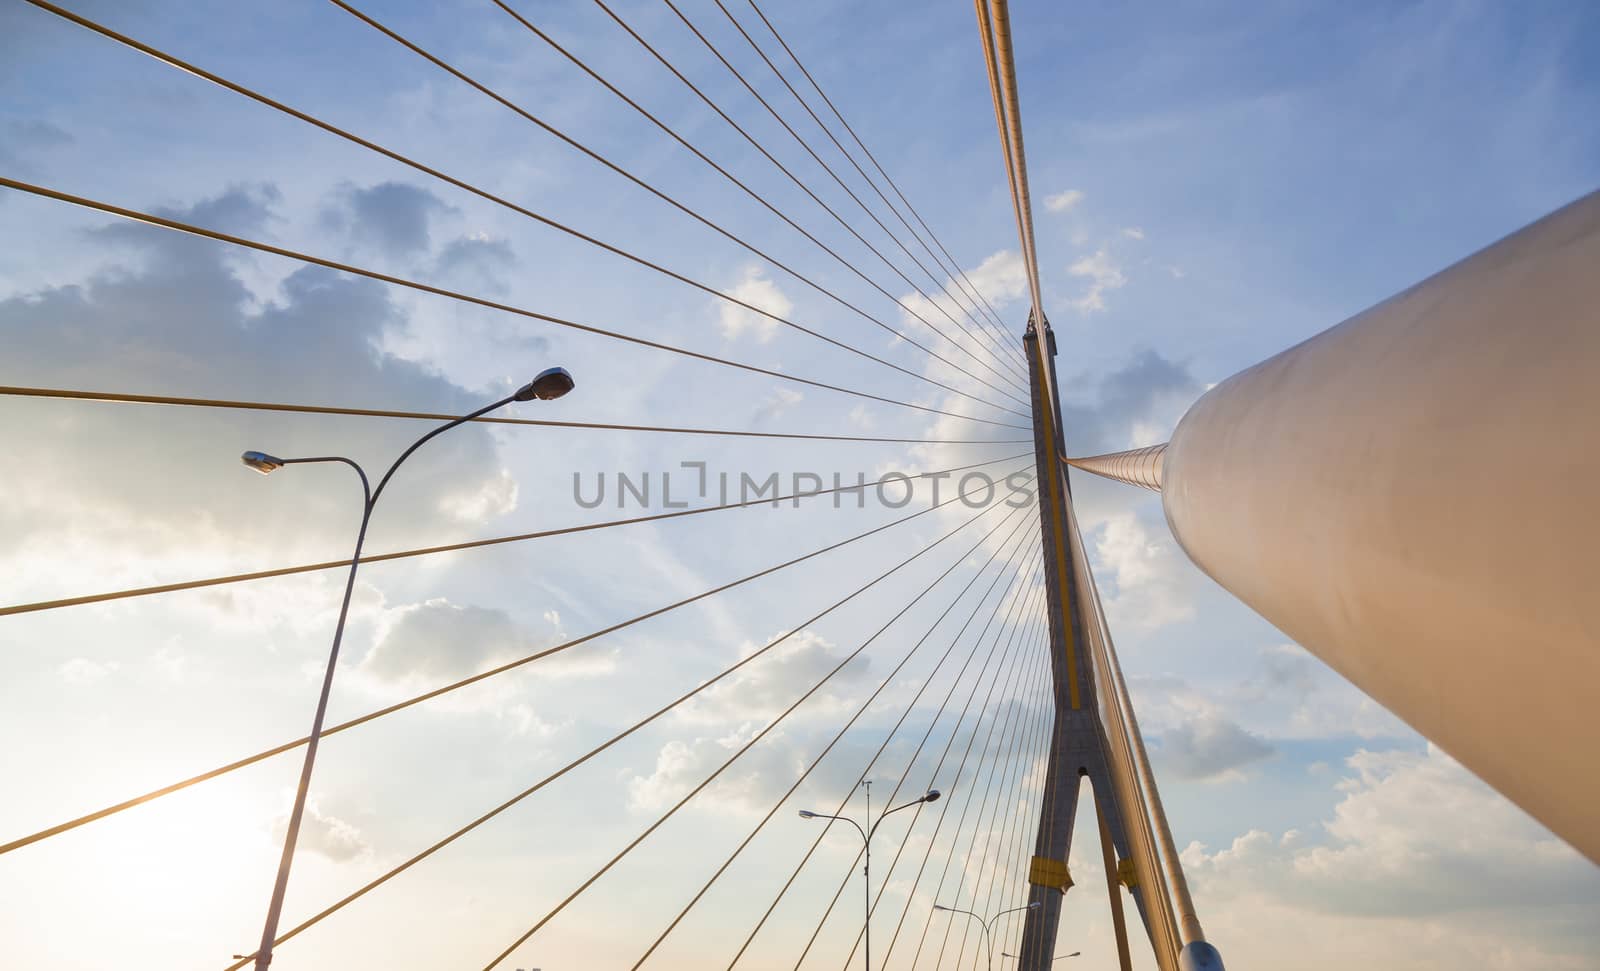 Rama VIII Bridge During the evening. Sunny and clear skies in the evening sun began to darken.